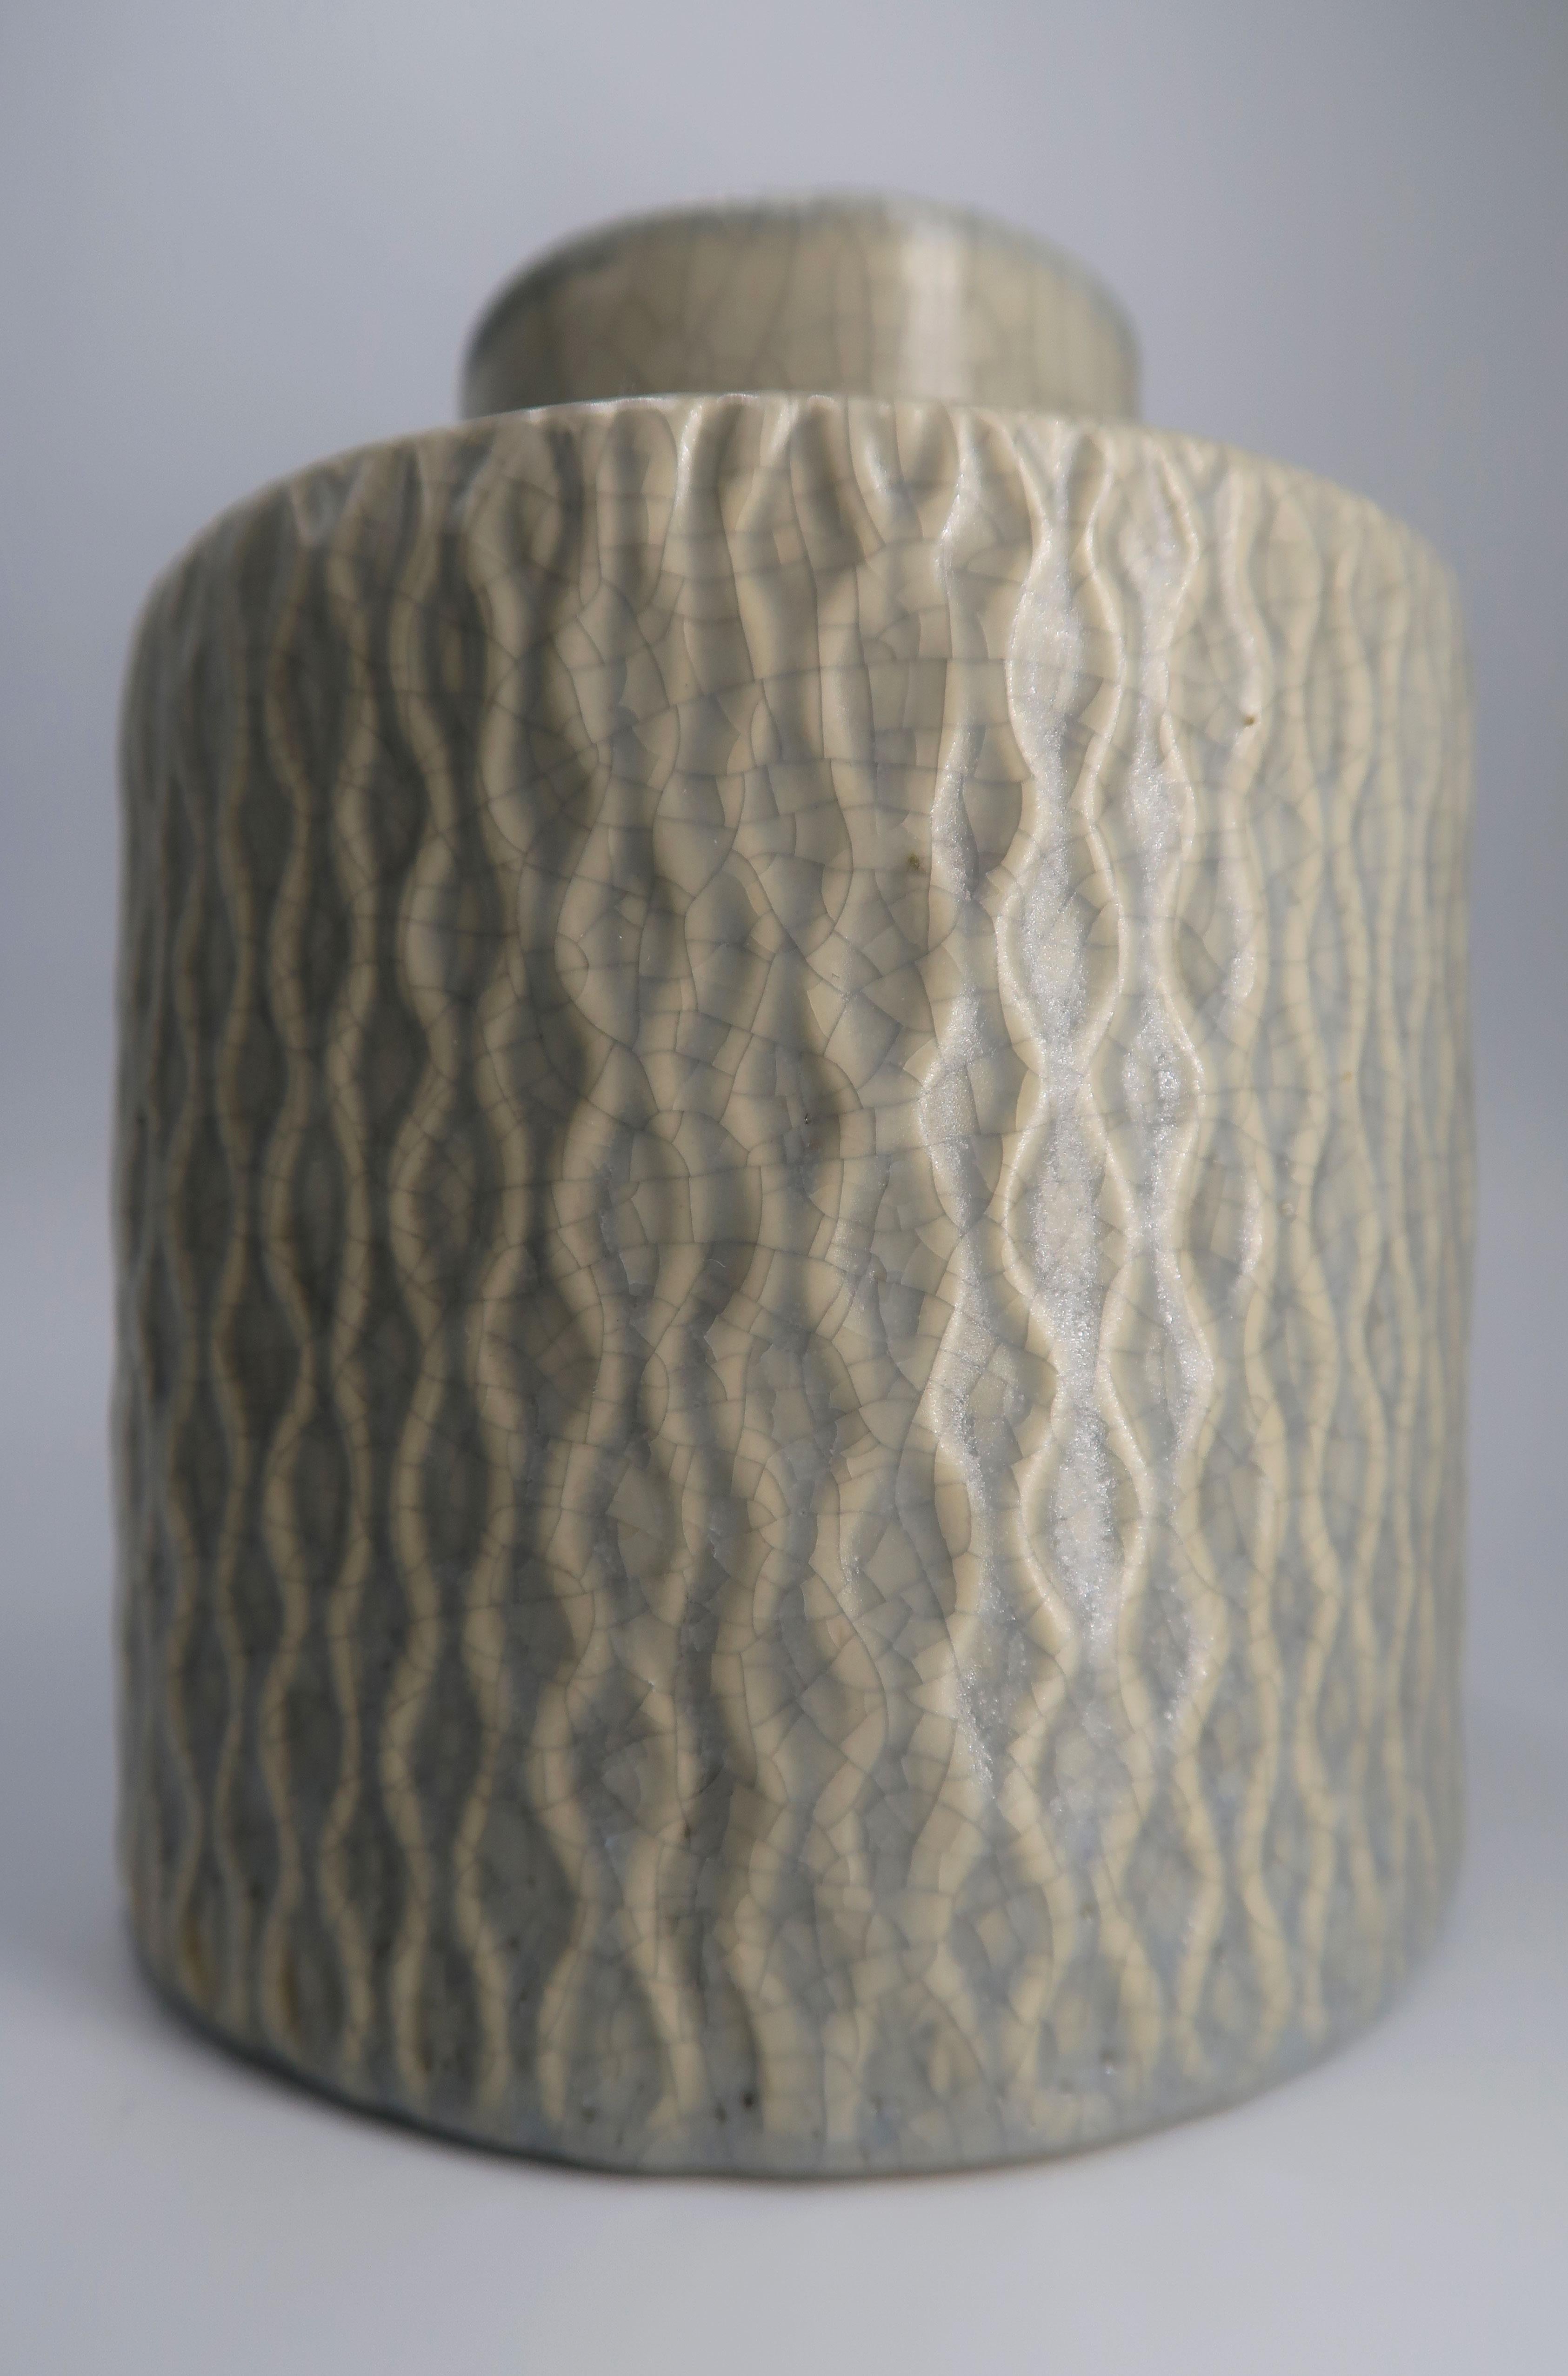 Danish mid-century modern handmade ceramic vase from the 1960s. Winding weave like pattern from top to bottom with sage green glaze outside and inside the vase. Crackle glaze with small imperfections adding to the vintage look of this piece. Fine